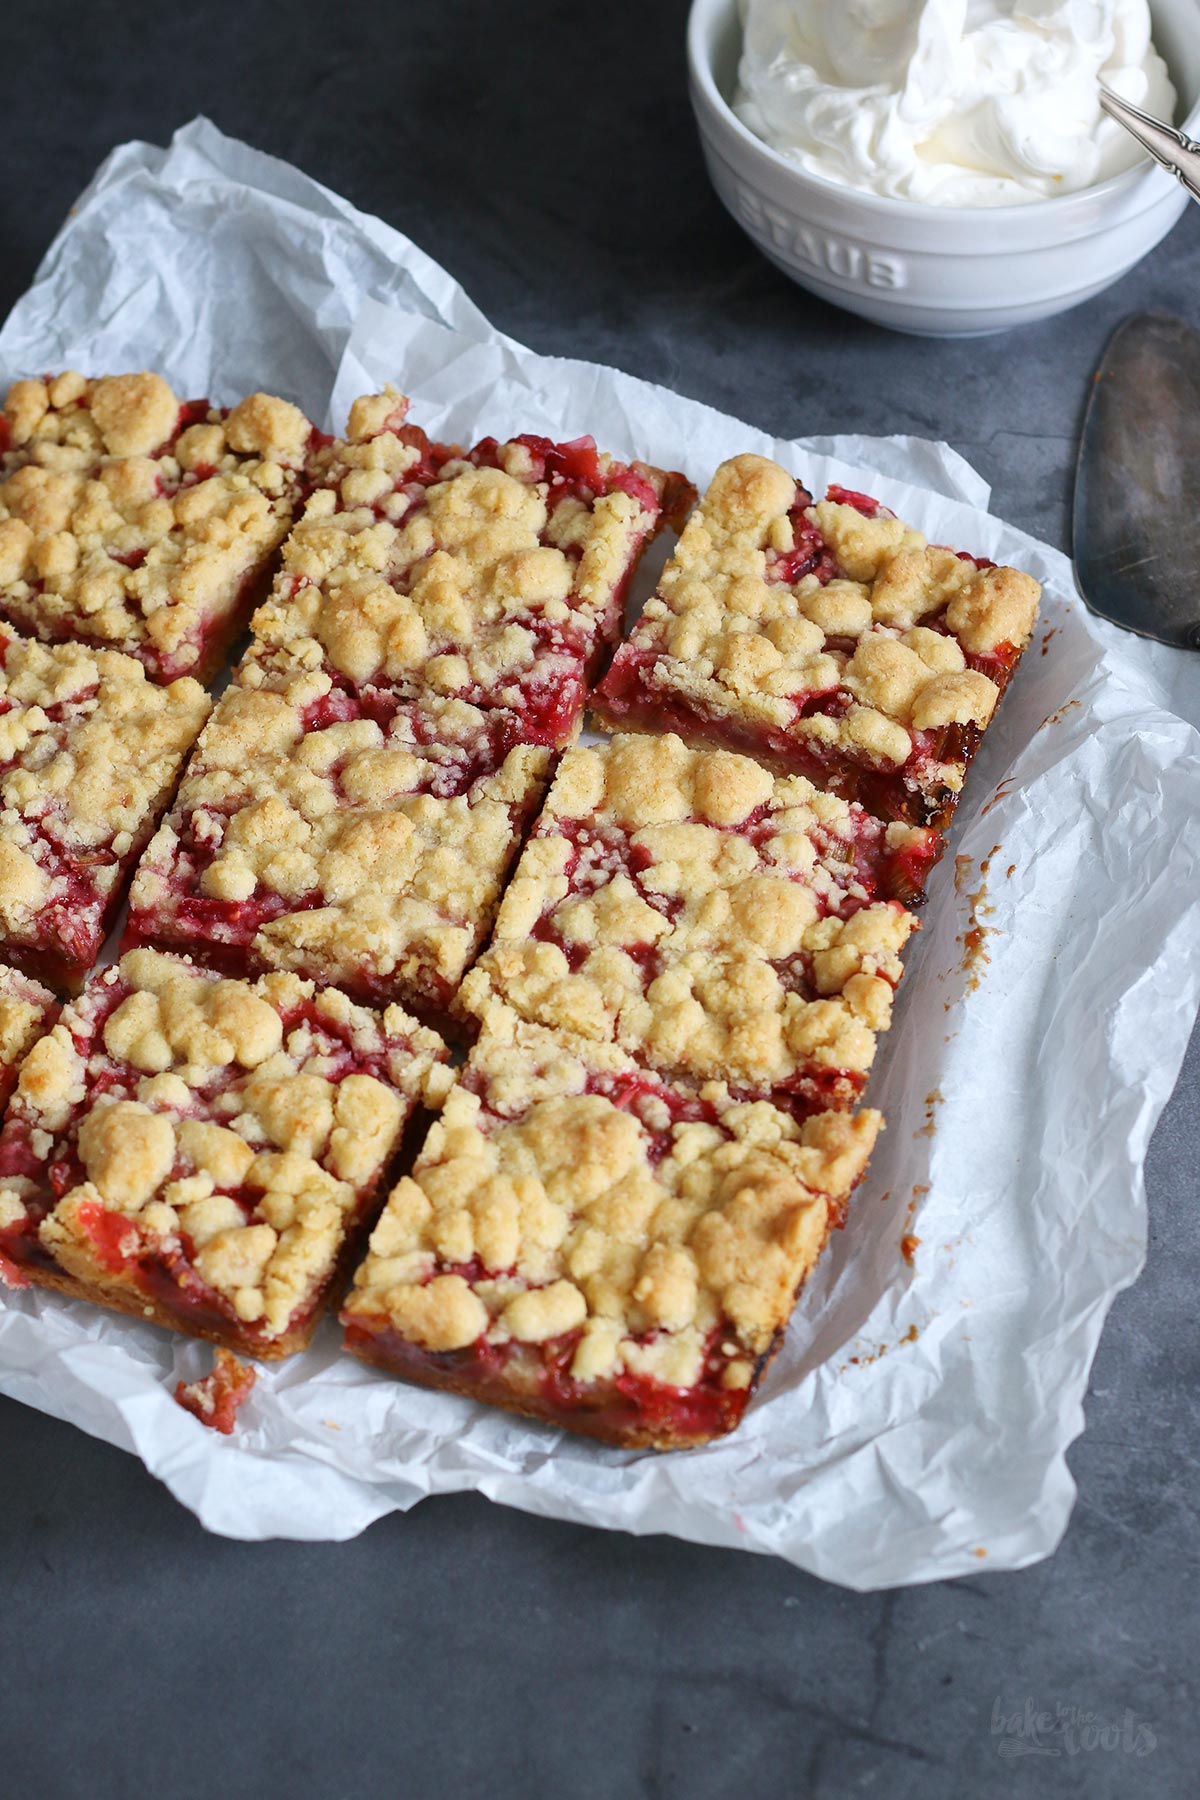 Rhabarber Streusel Shortbread Bars | Bake to the roots